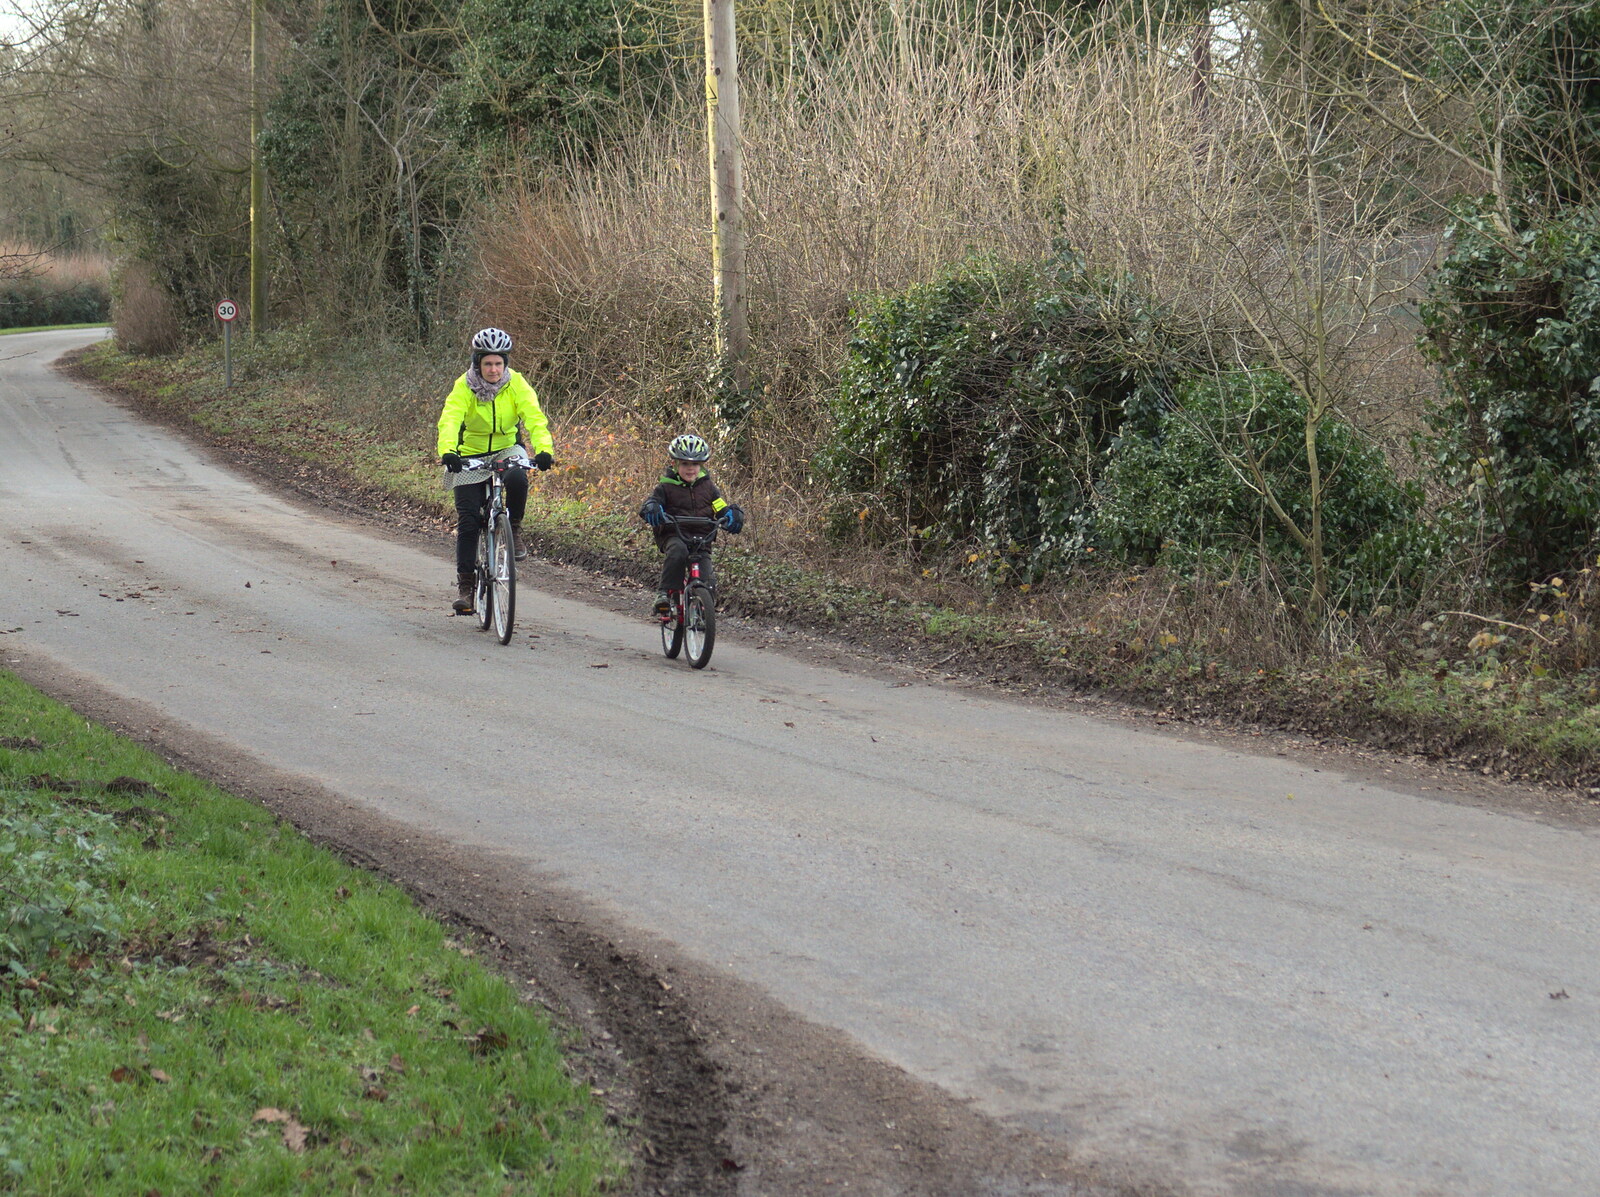 Isobel and Fred cycle down Brome Street from The BBs do a Recording, Hethel, Norfolk - 18th January 2015